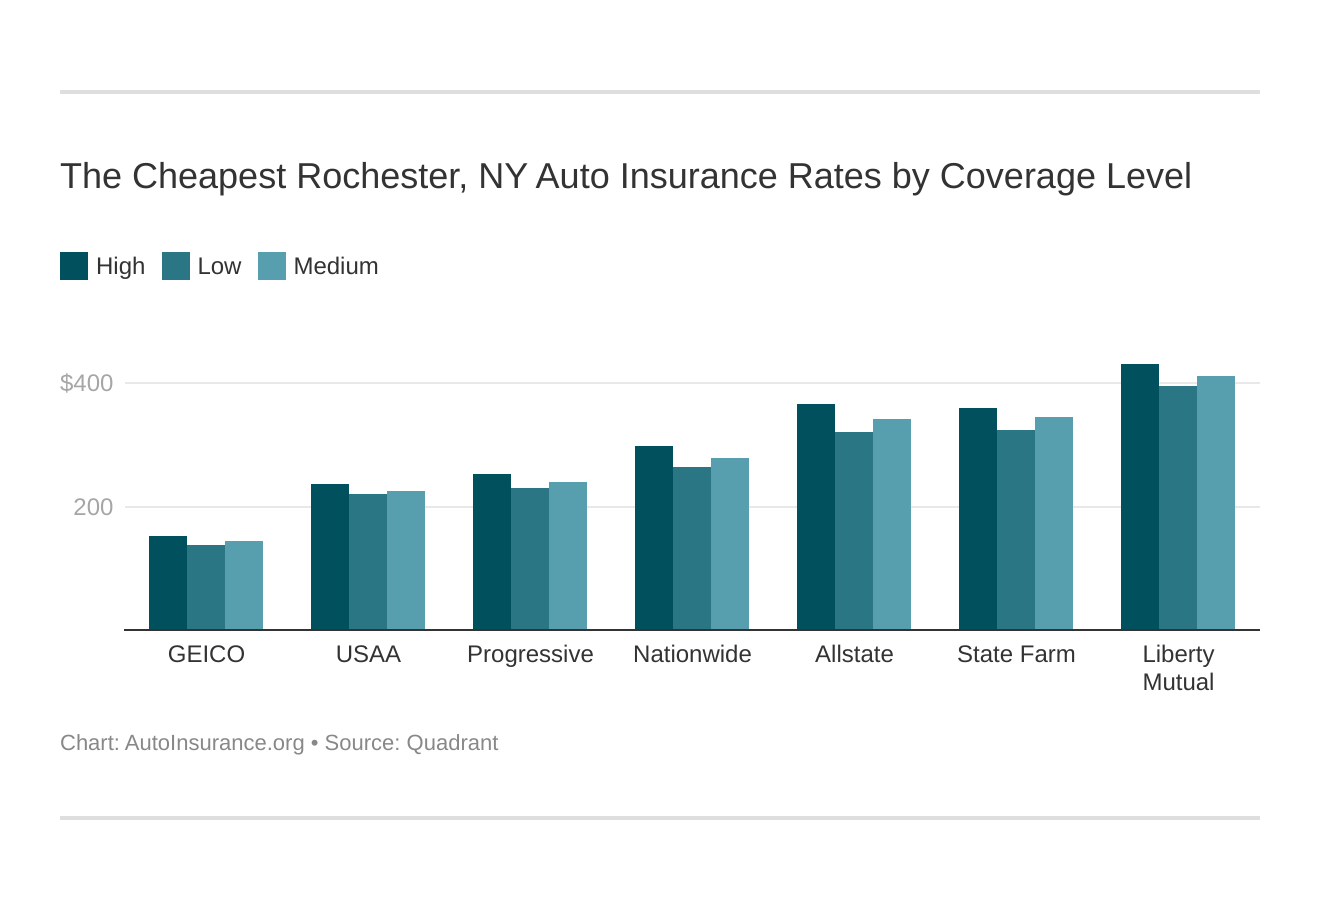 The Cheapest Rochester, NY Auto Insurance Rates by Coverage Level